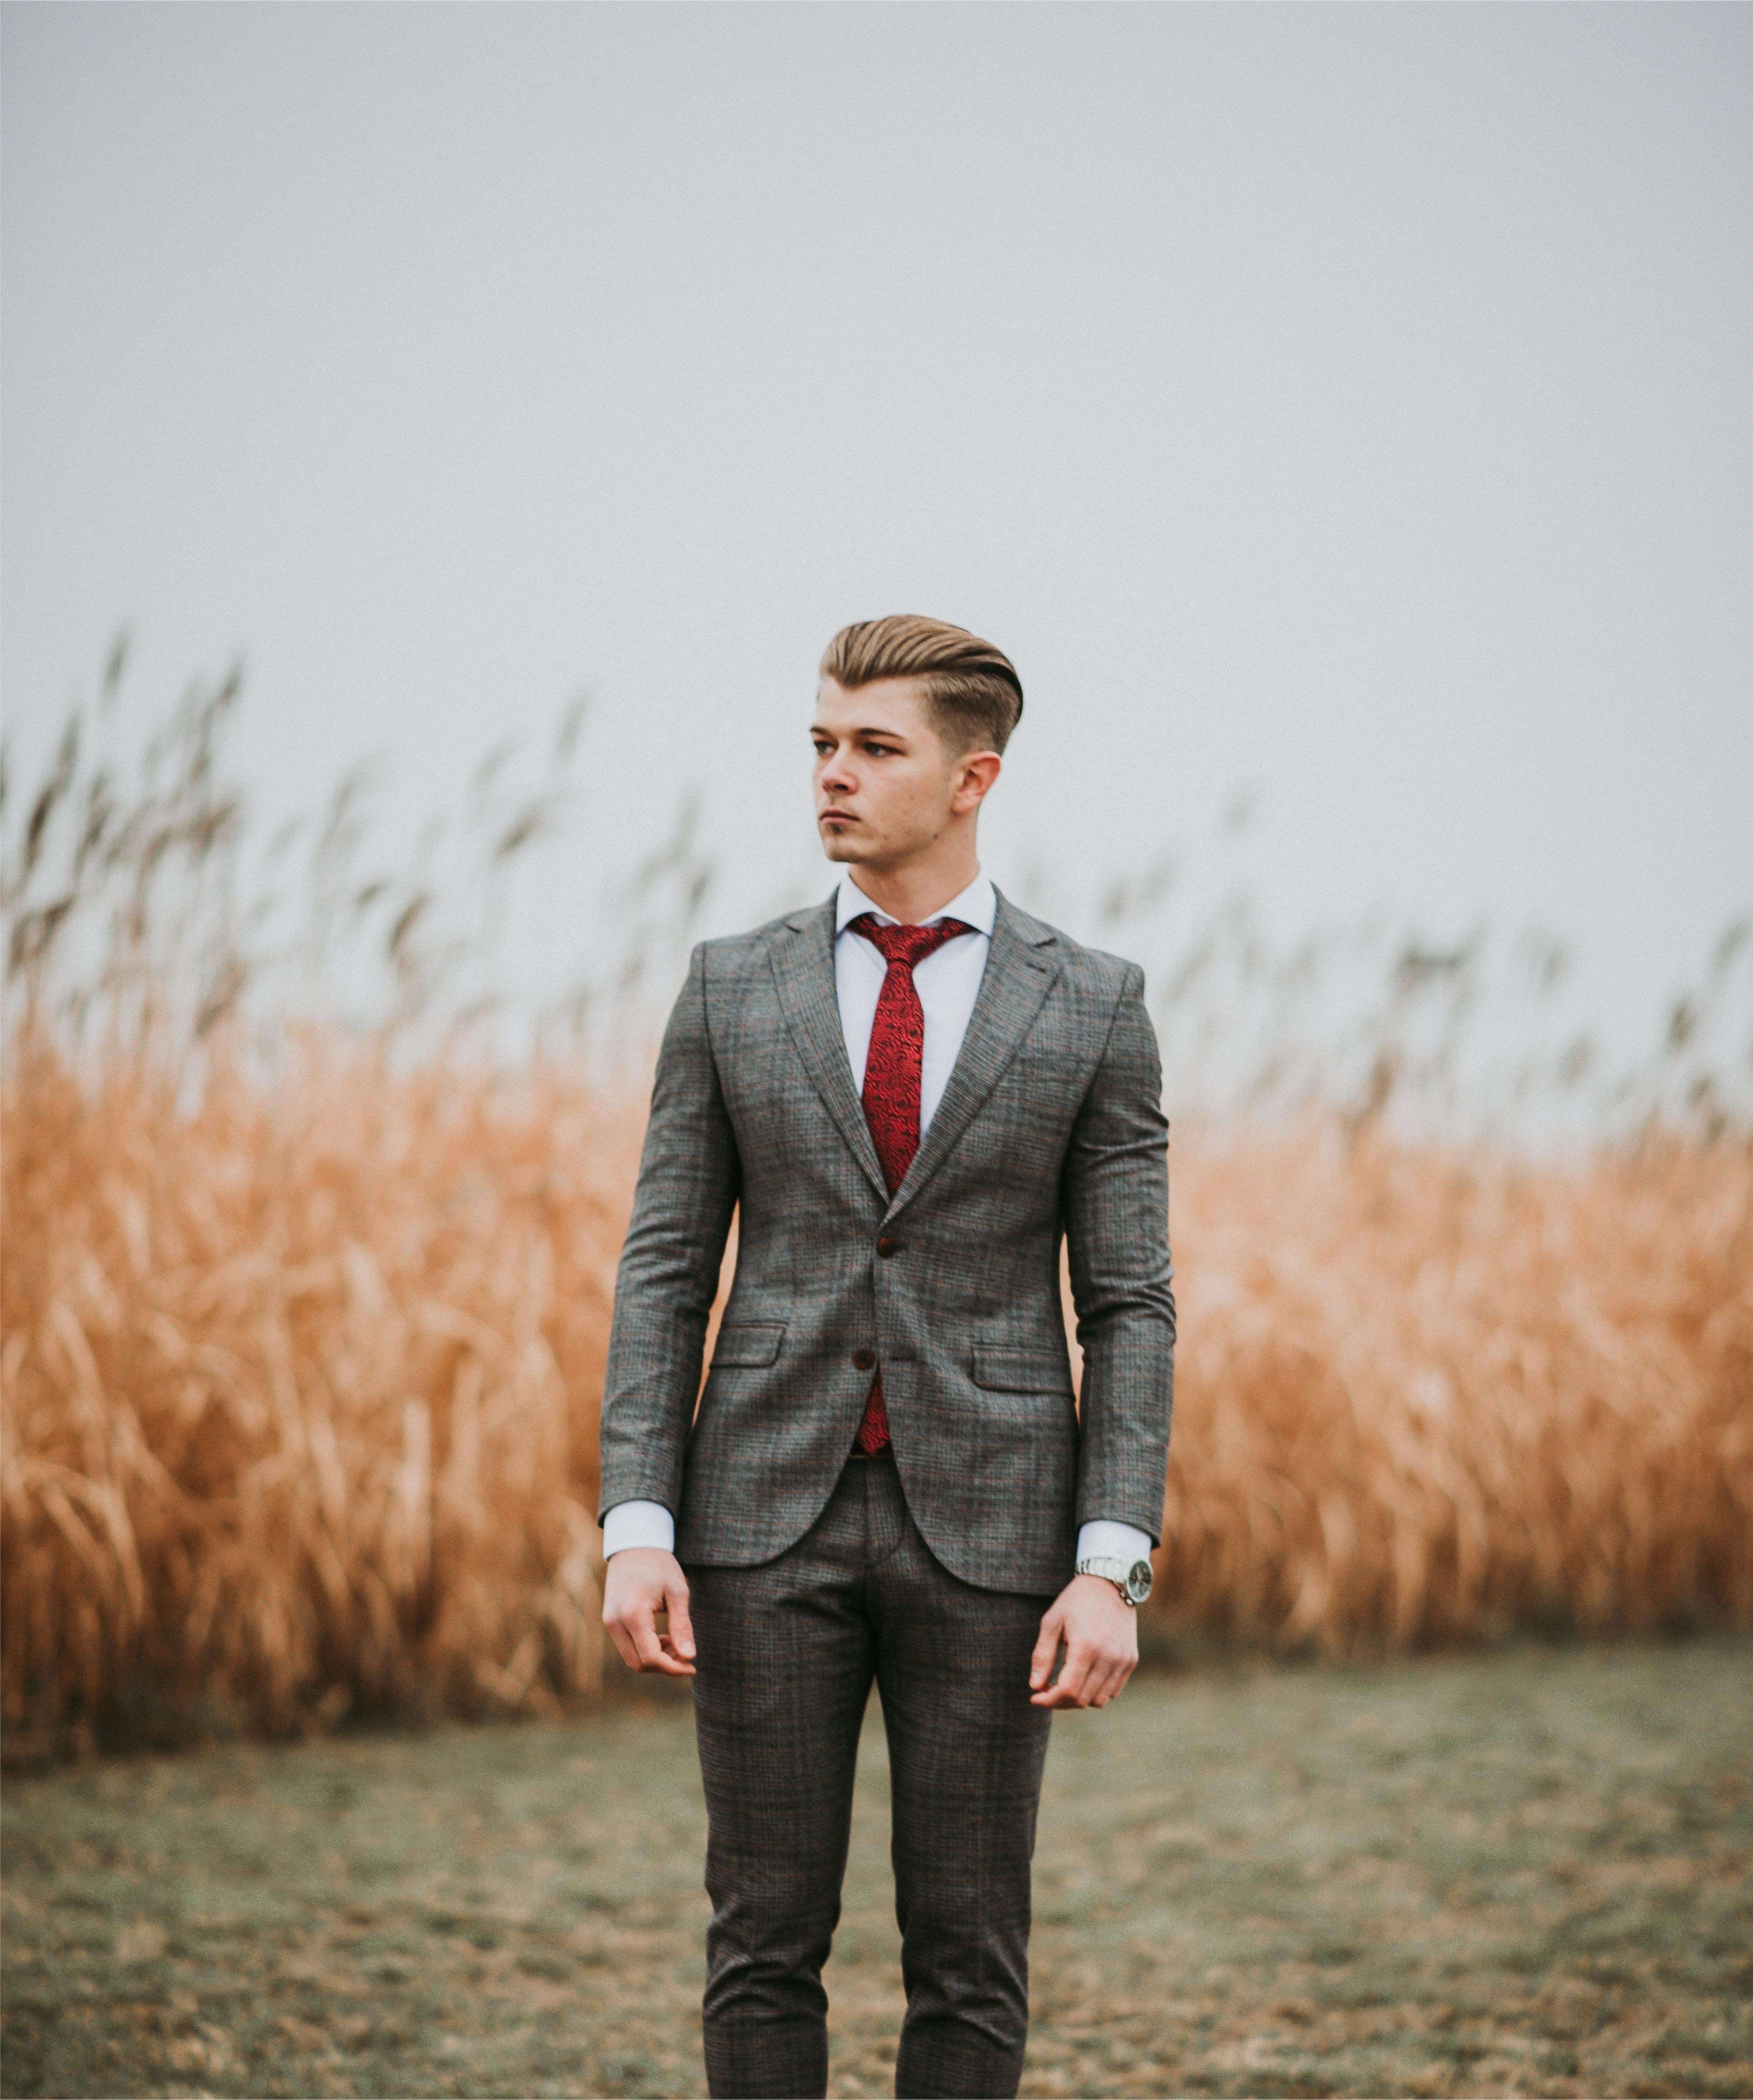 Do young men still like wearing suits?